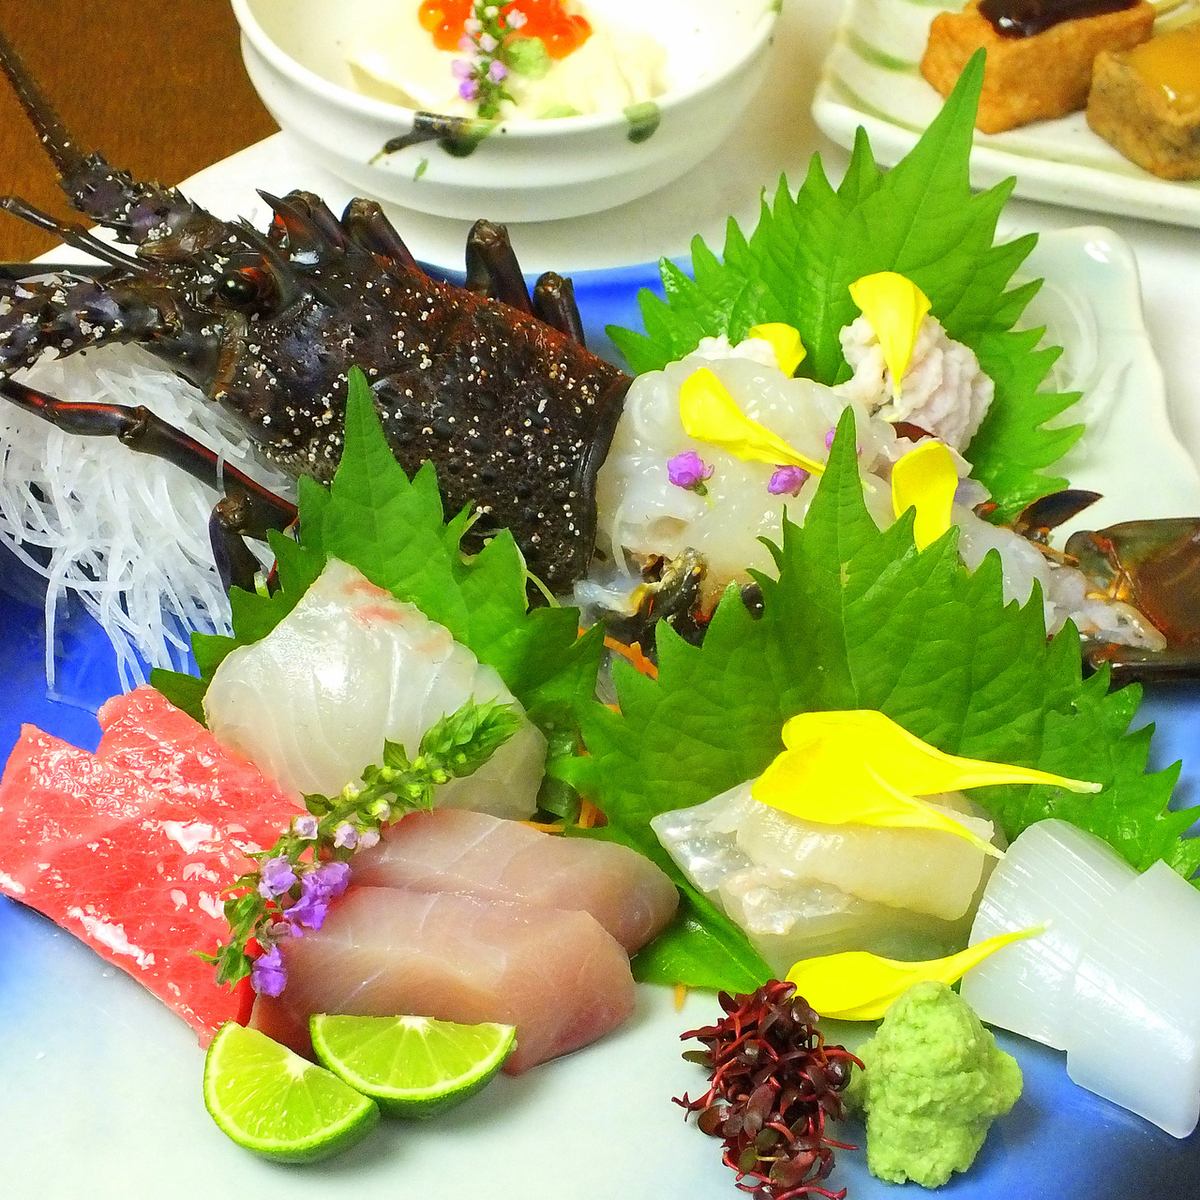 This is a recommended restaurant that serves outstandingly fresh fish and sashimi.There are plenty of other fish dishes available as well.